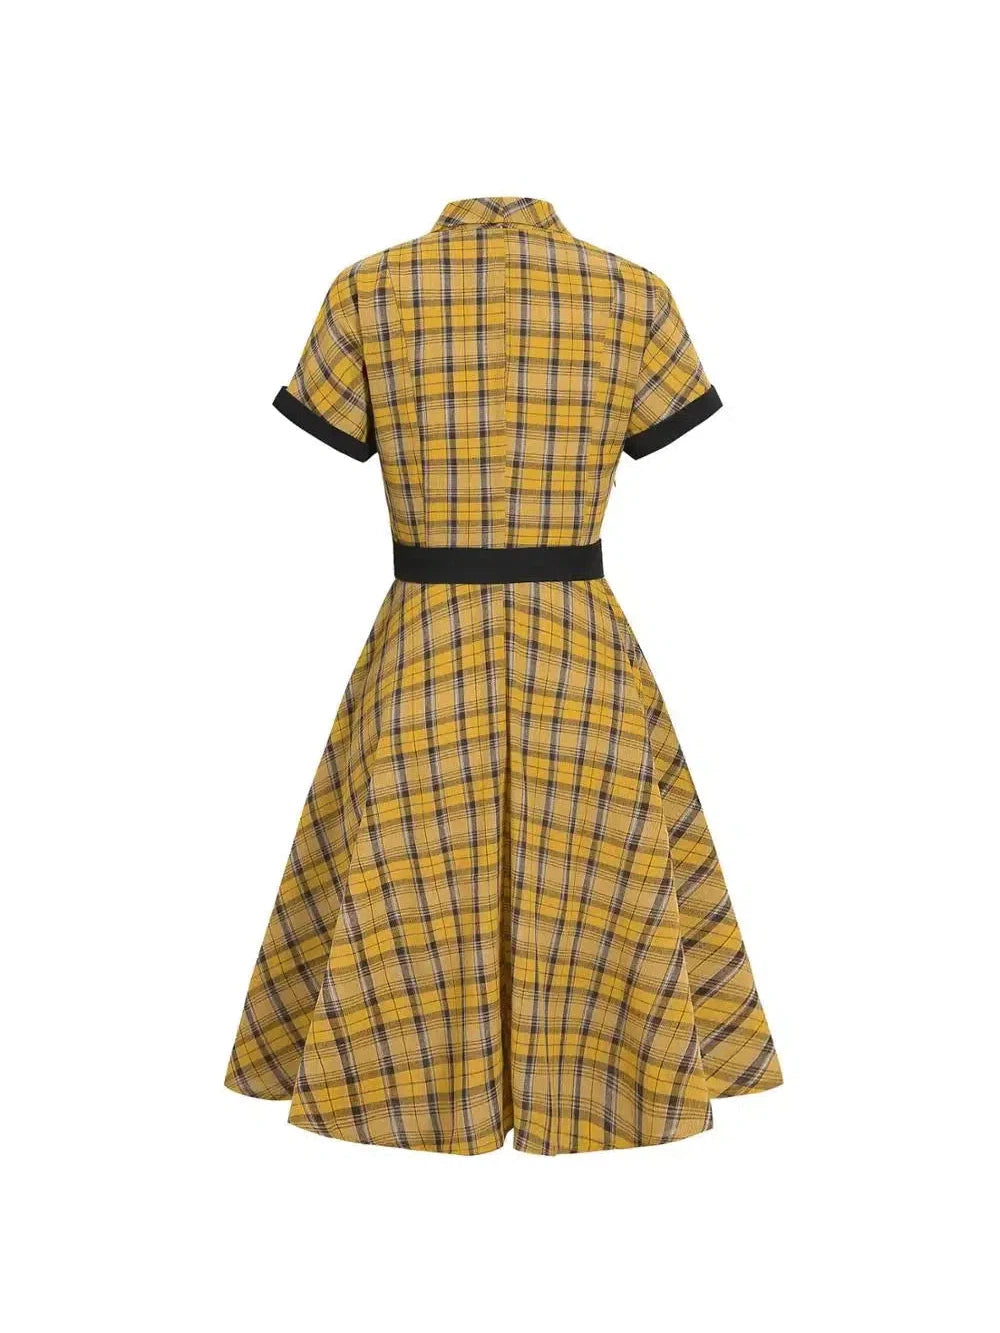 Lucille Plaid Single Breasted 50s Dress